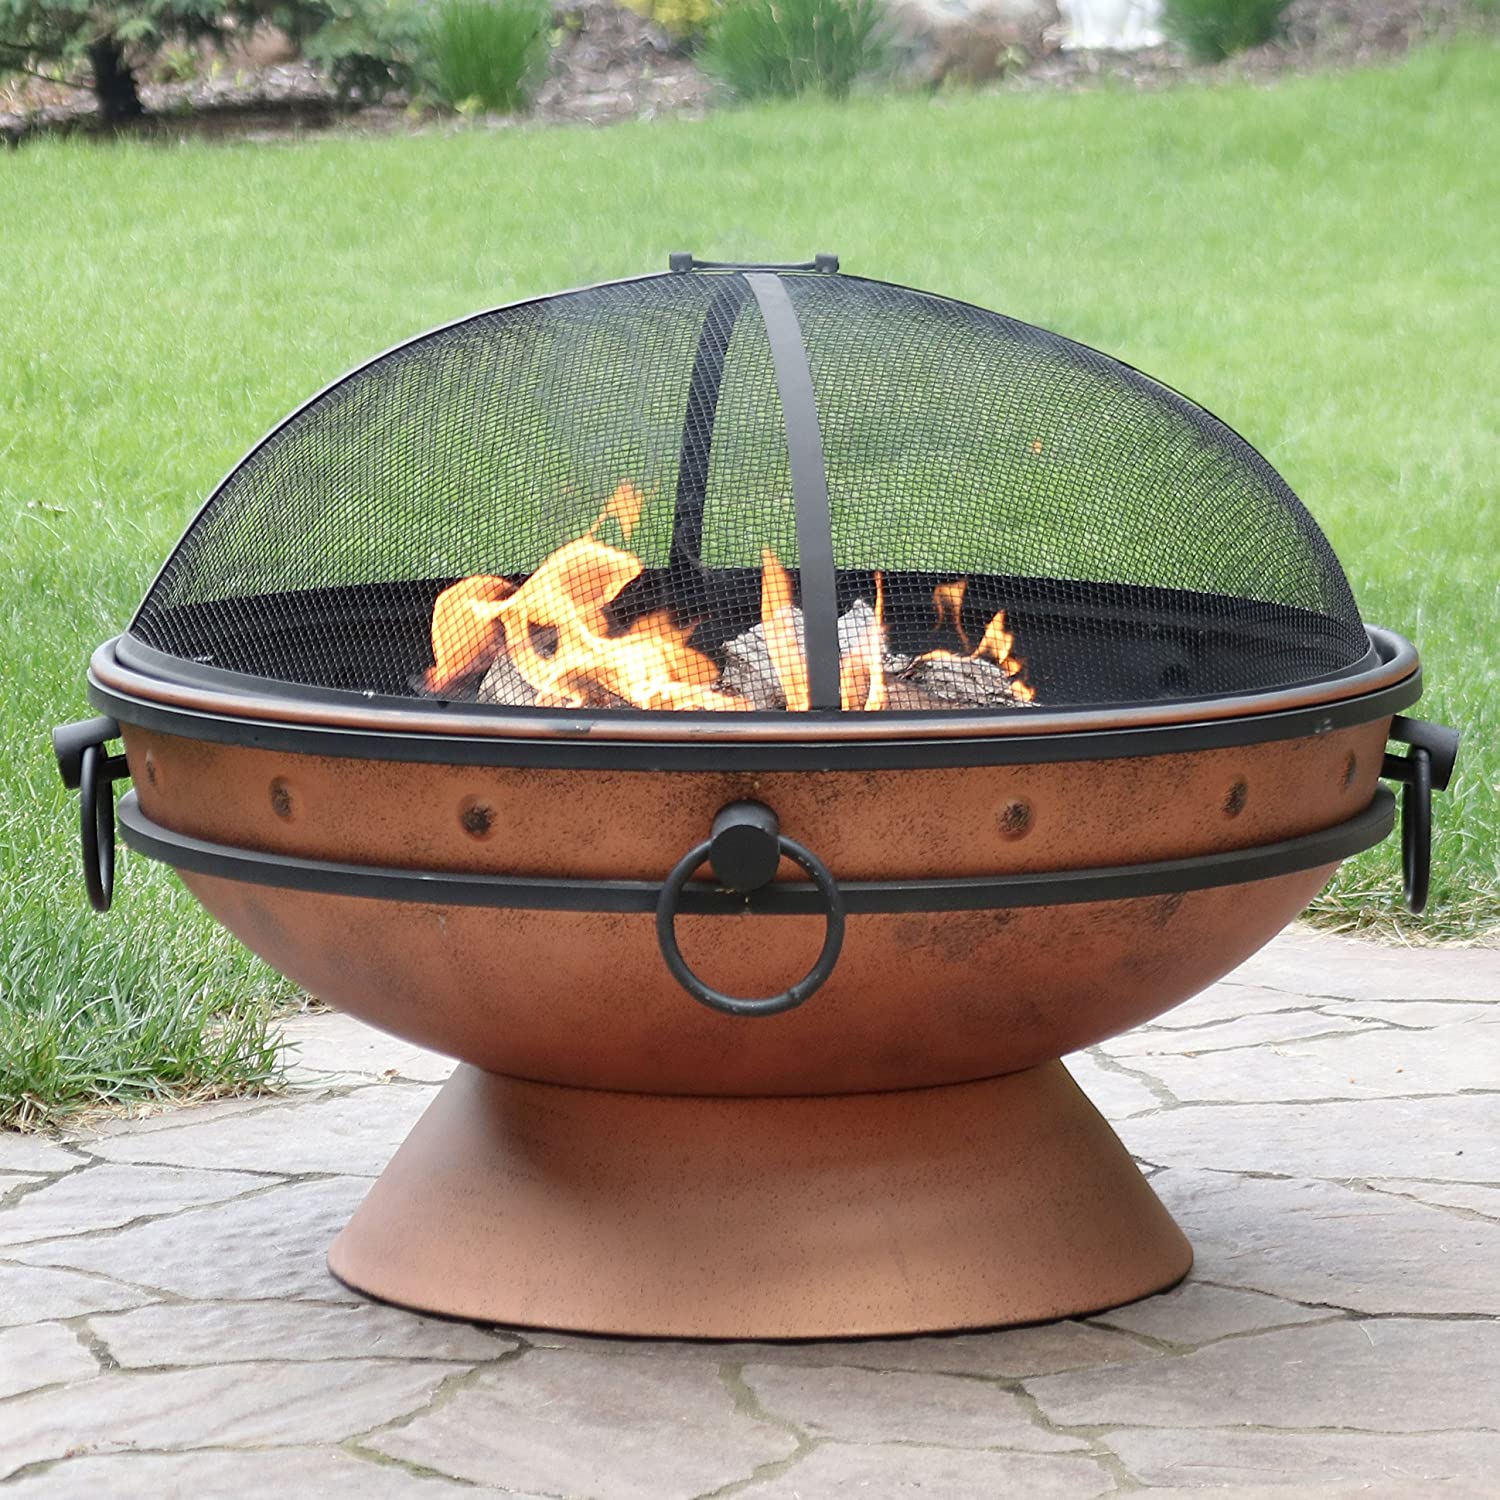 Fire Pits In Stock Now To Extend Your, Super Sky Wildlife Fire Pit